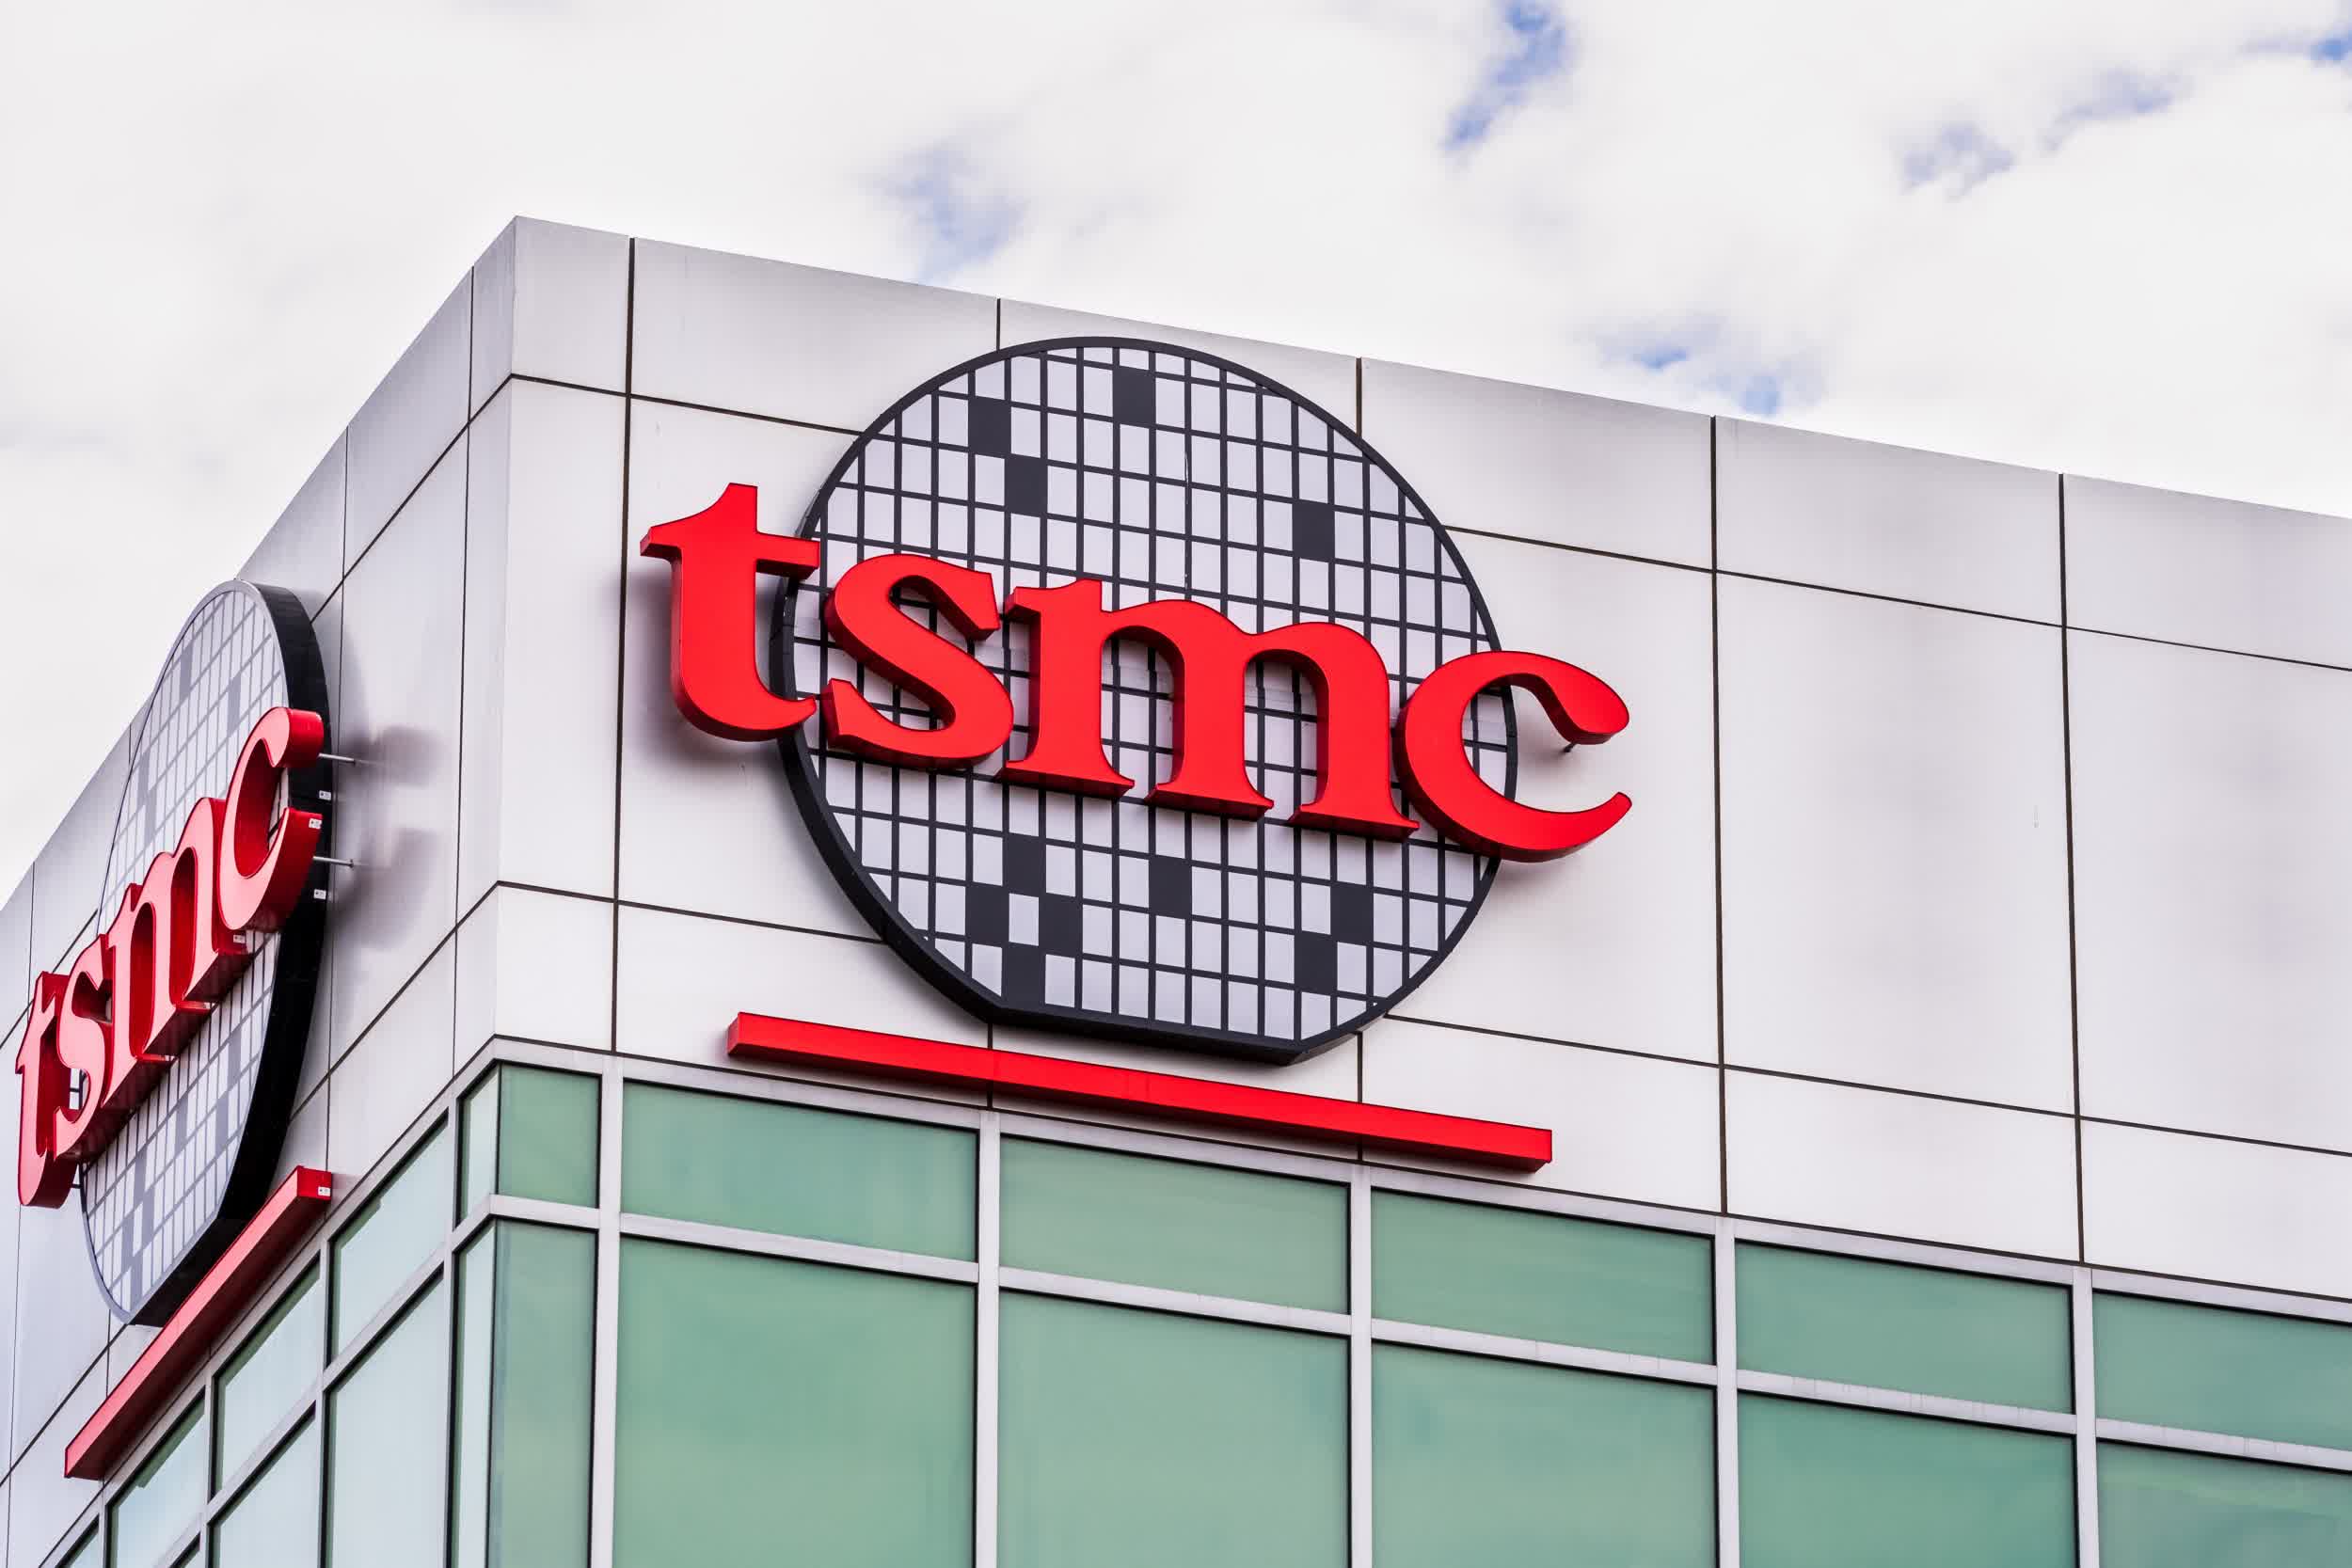 Apple reluctantly agrees to TSMC's price increases